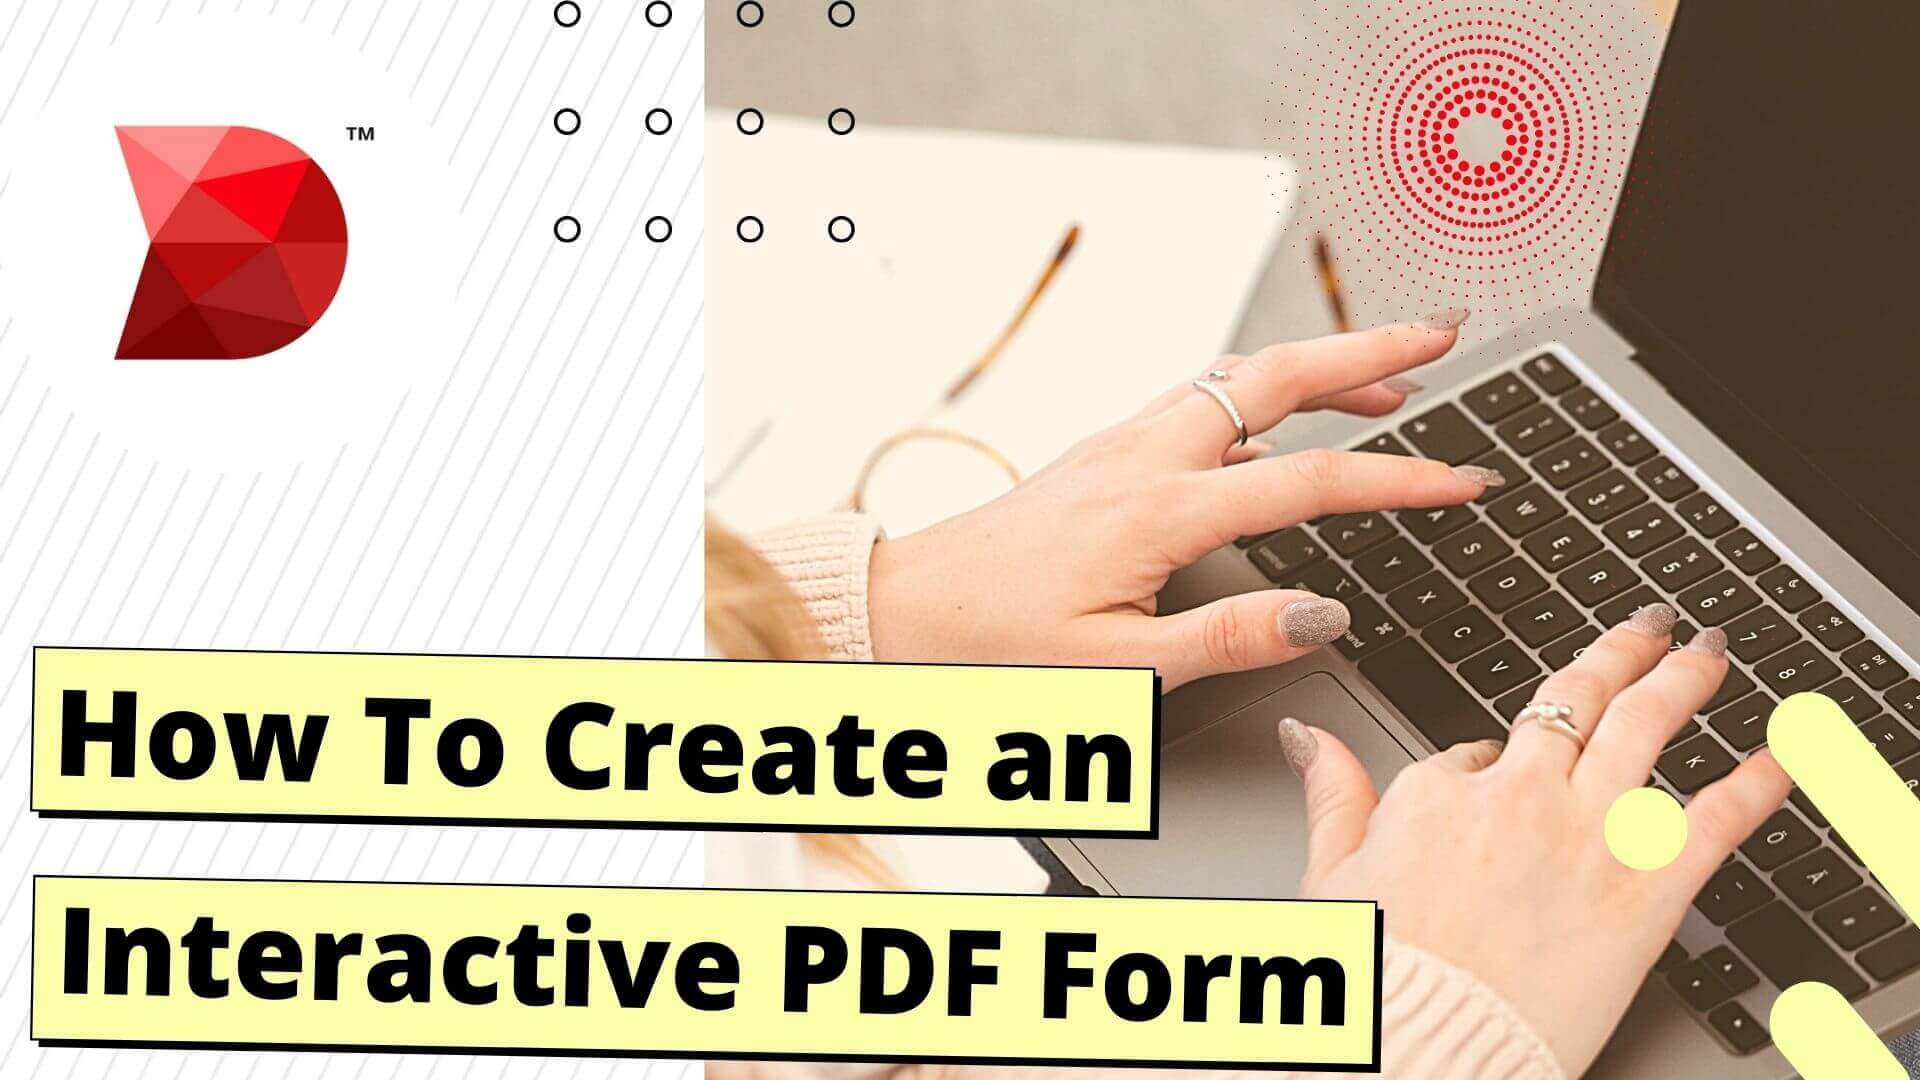 If you're interested in creating an interactive PDF form, this article is a must-read. Read here to learn more!